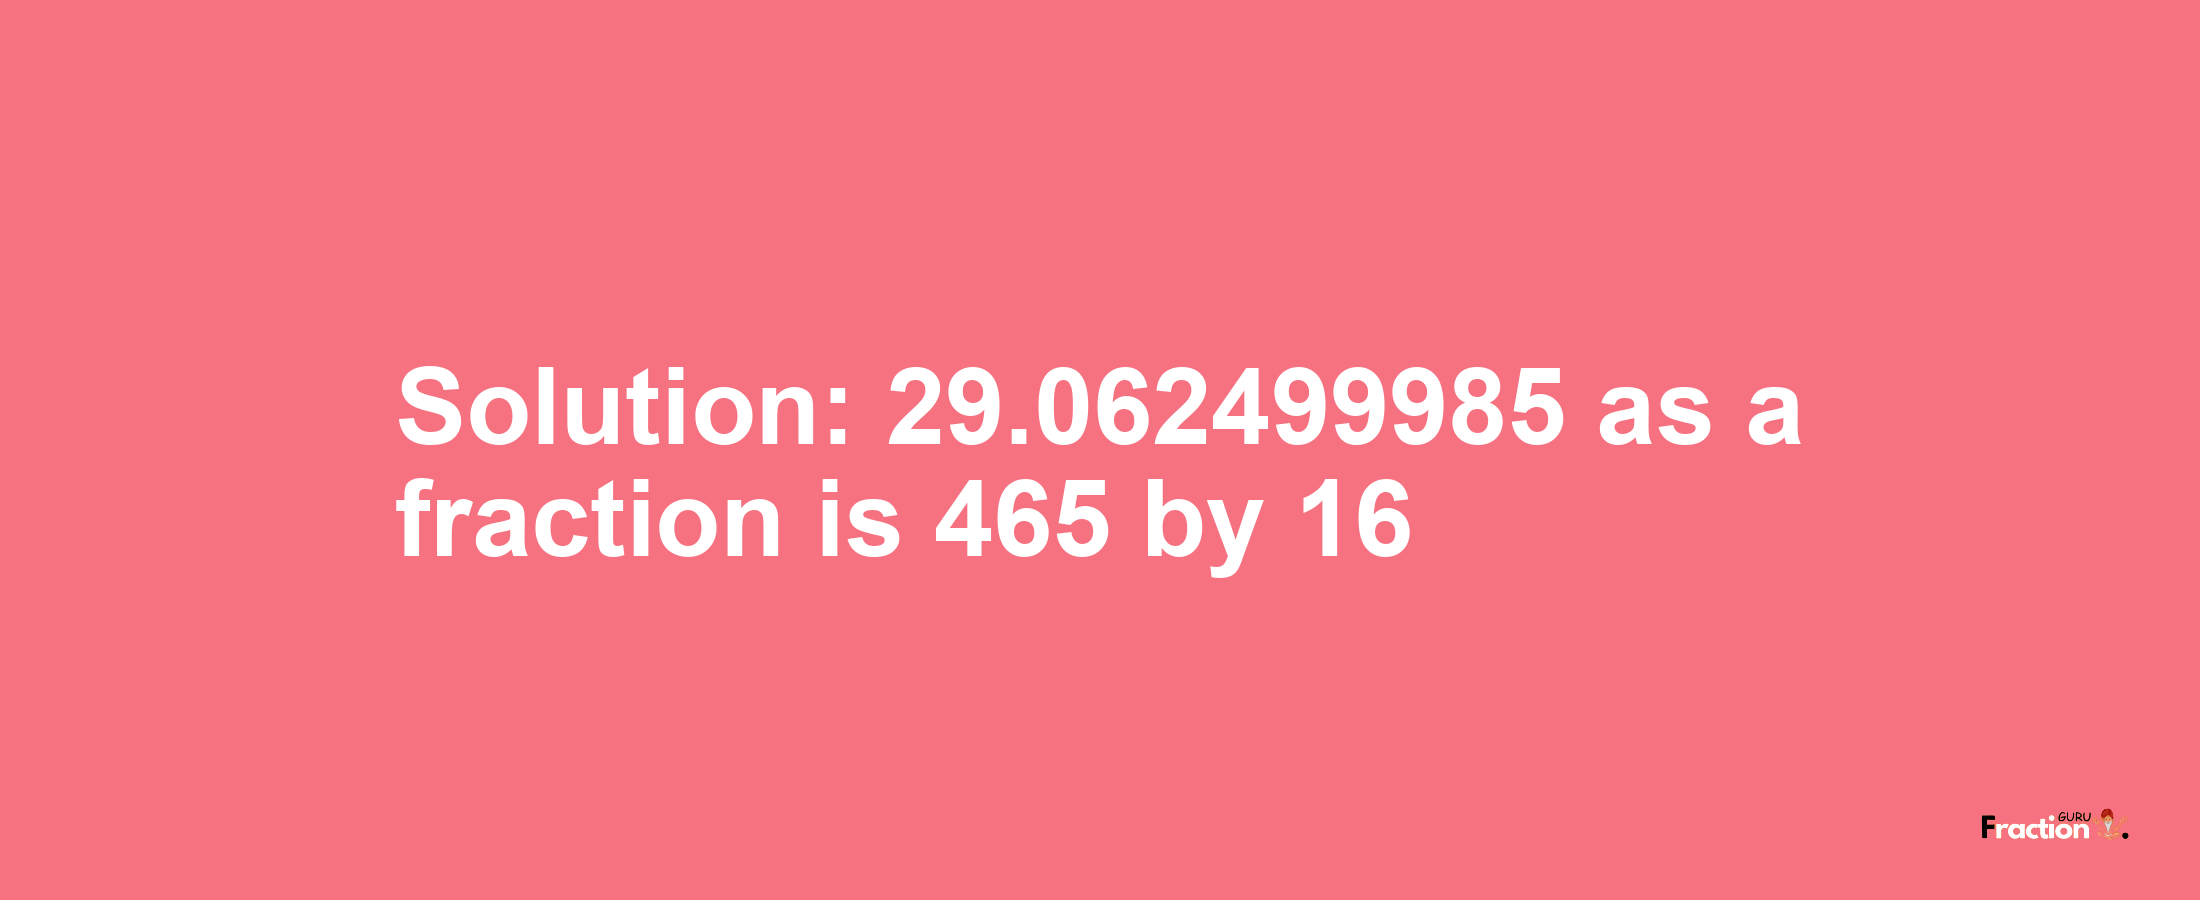 Solution:29.062499985 as a fraction is 465/16